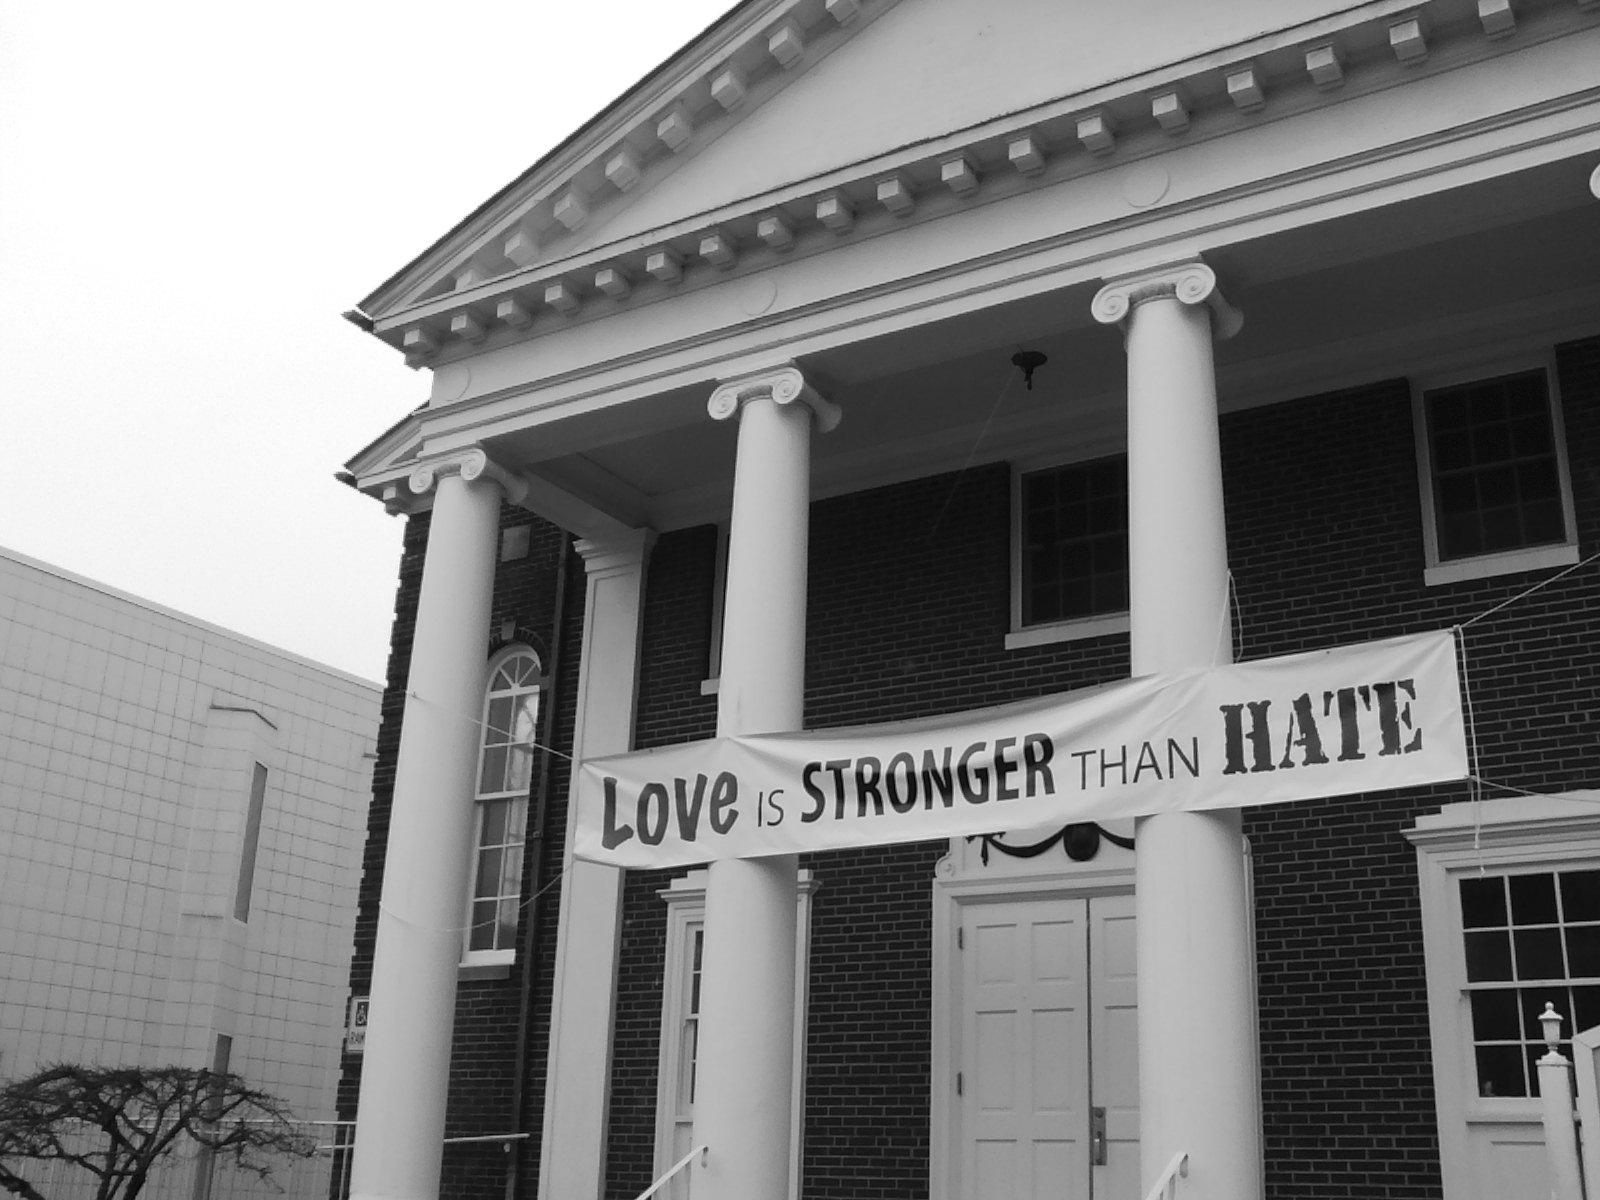 A banner over a building entrance says, 'Love is stronger than hate.'